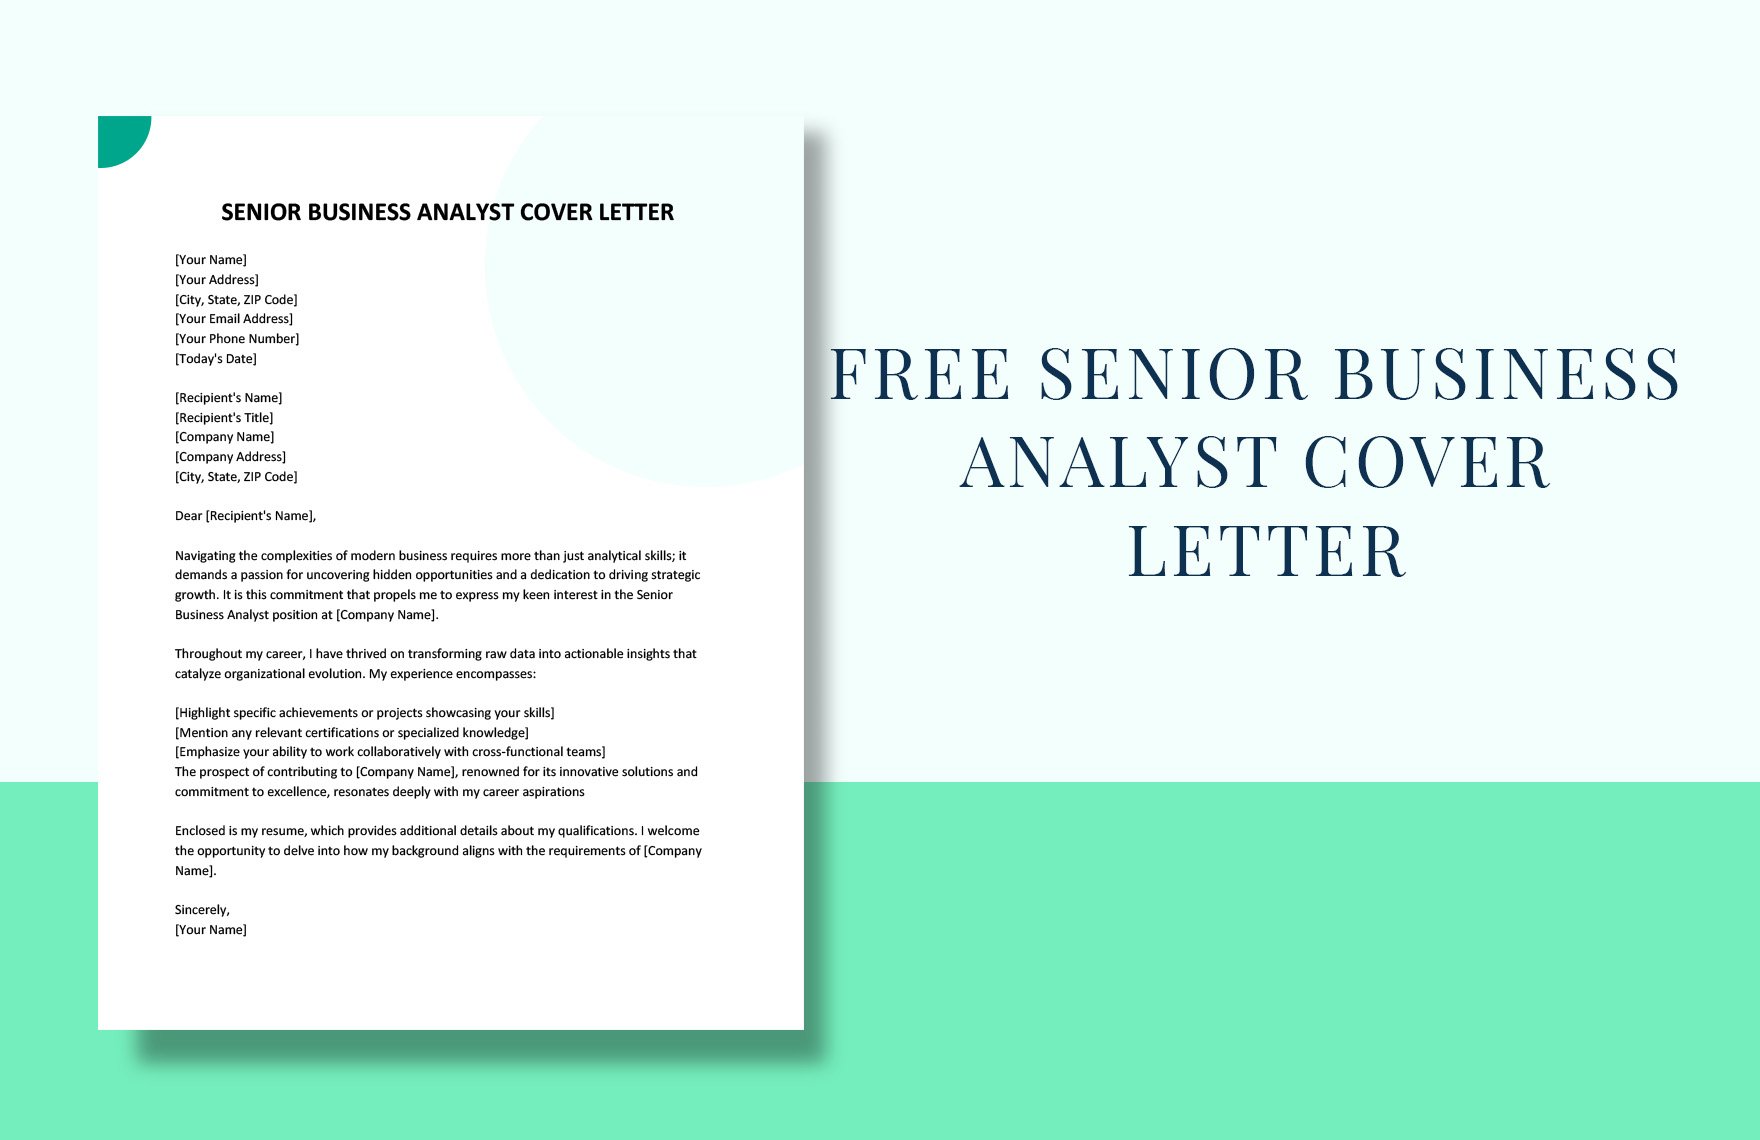 Senior Business Analyst Cover Letter in Word, Google Docs - Download ...